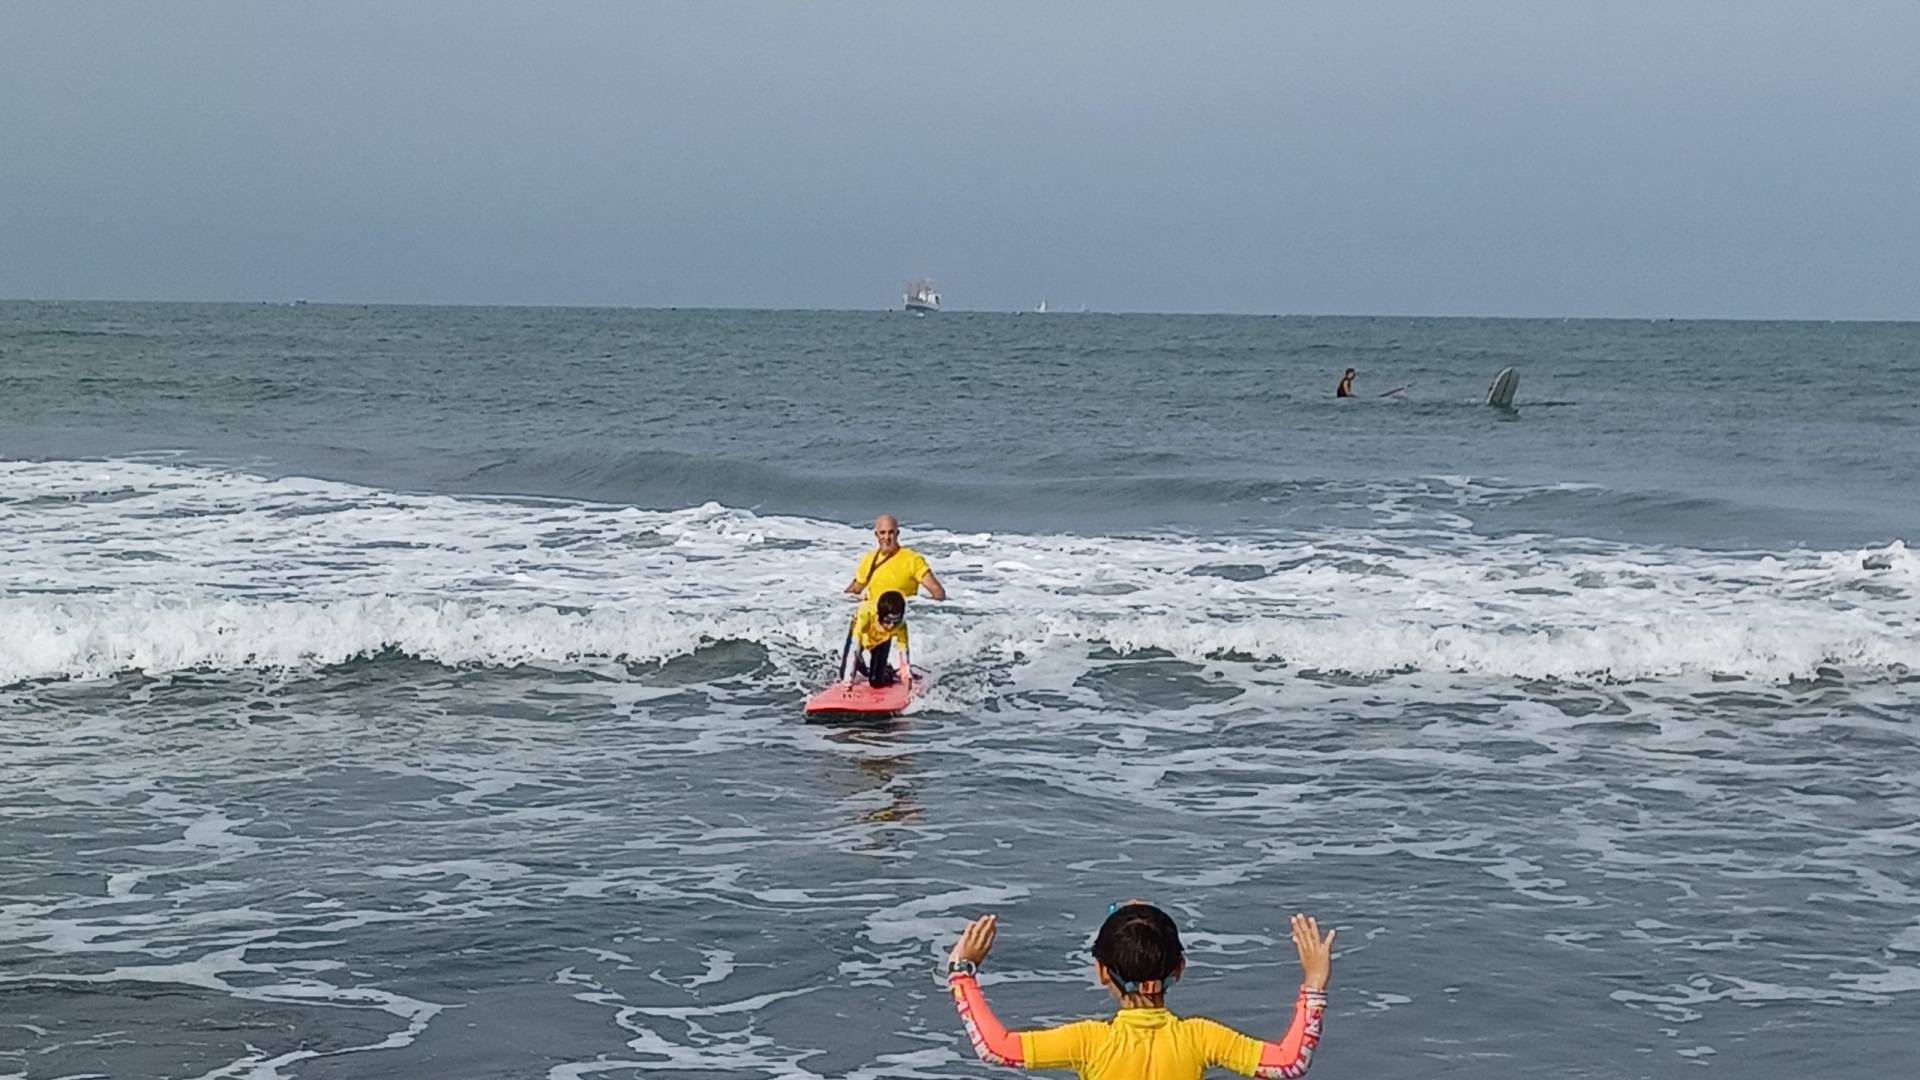 Child attempting to stand up on a surfboard. Coach in the background. Child supporter in the foreground.